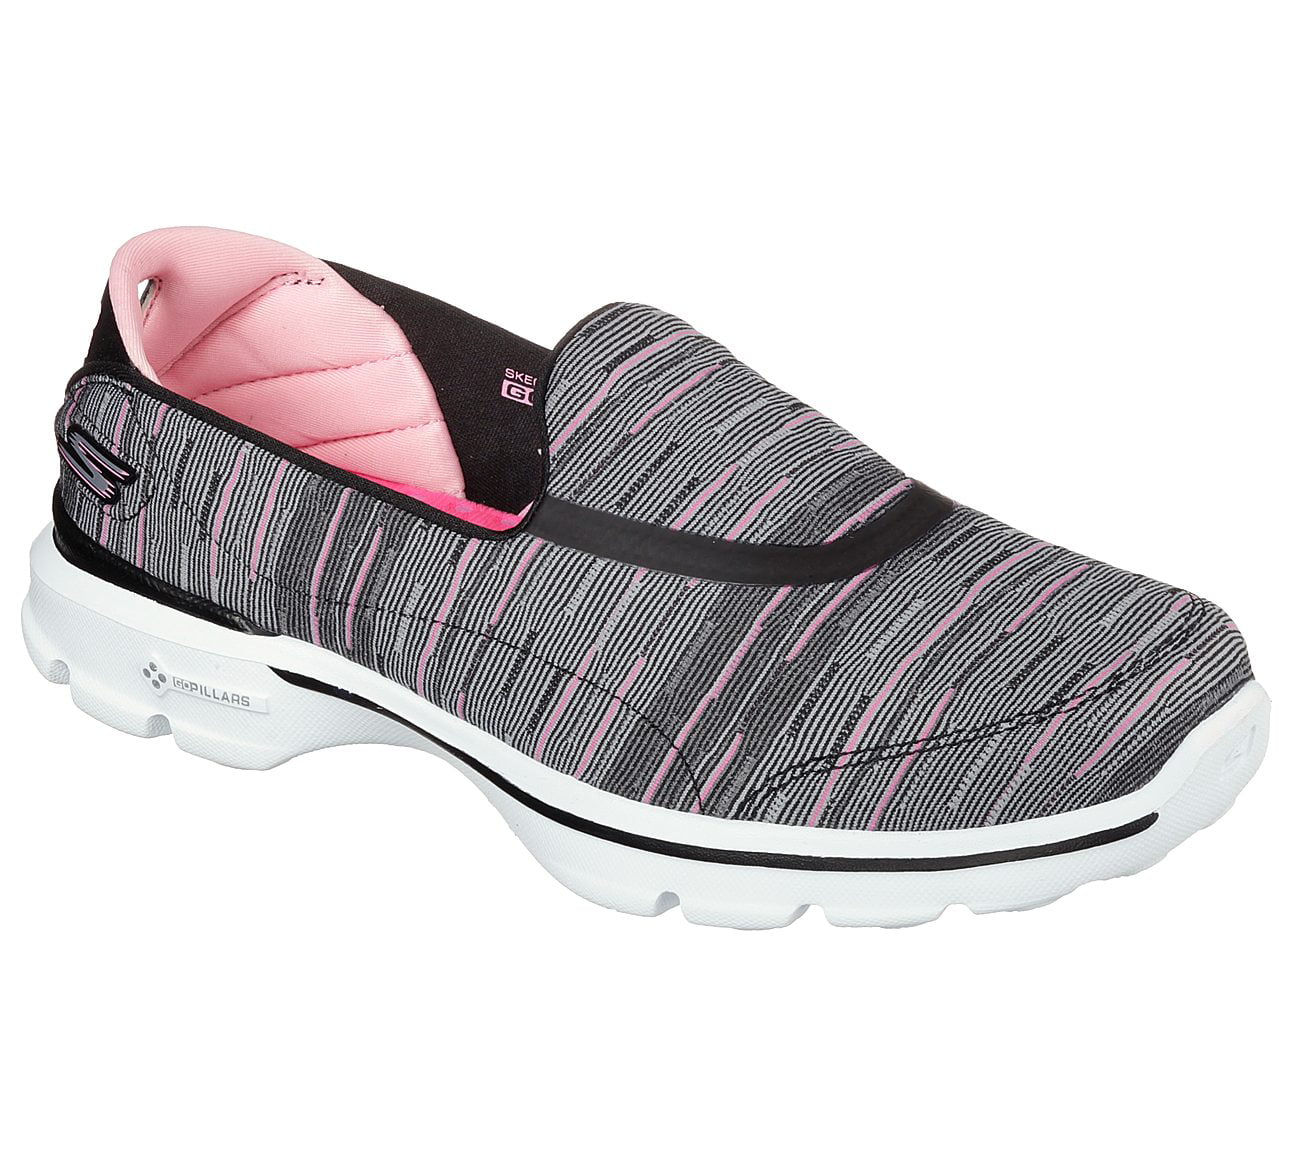 skechers breast cancer shoes 2016